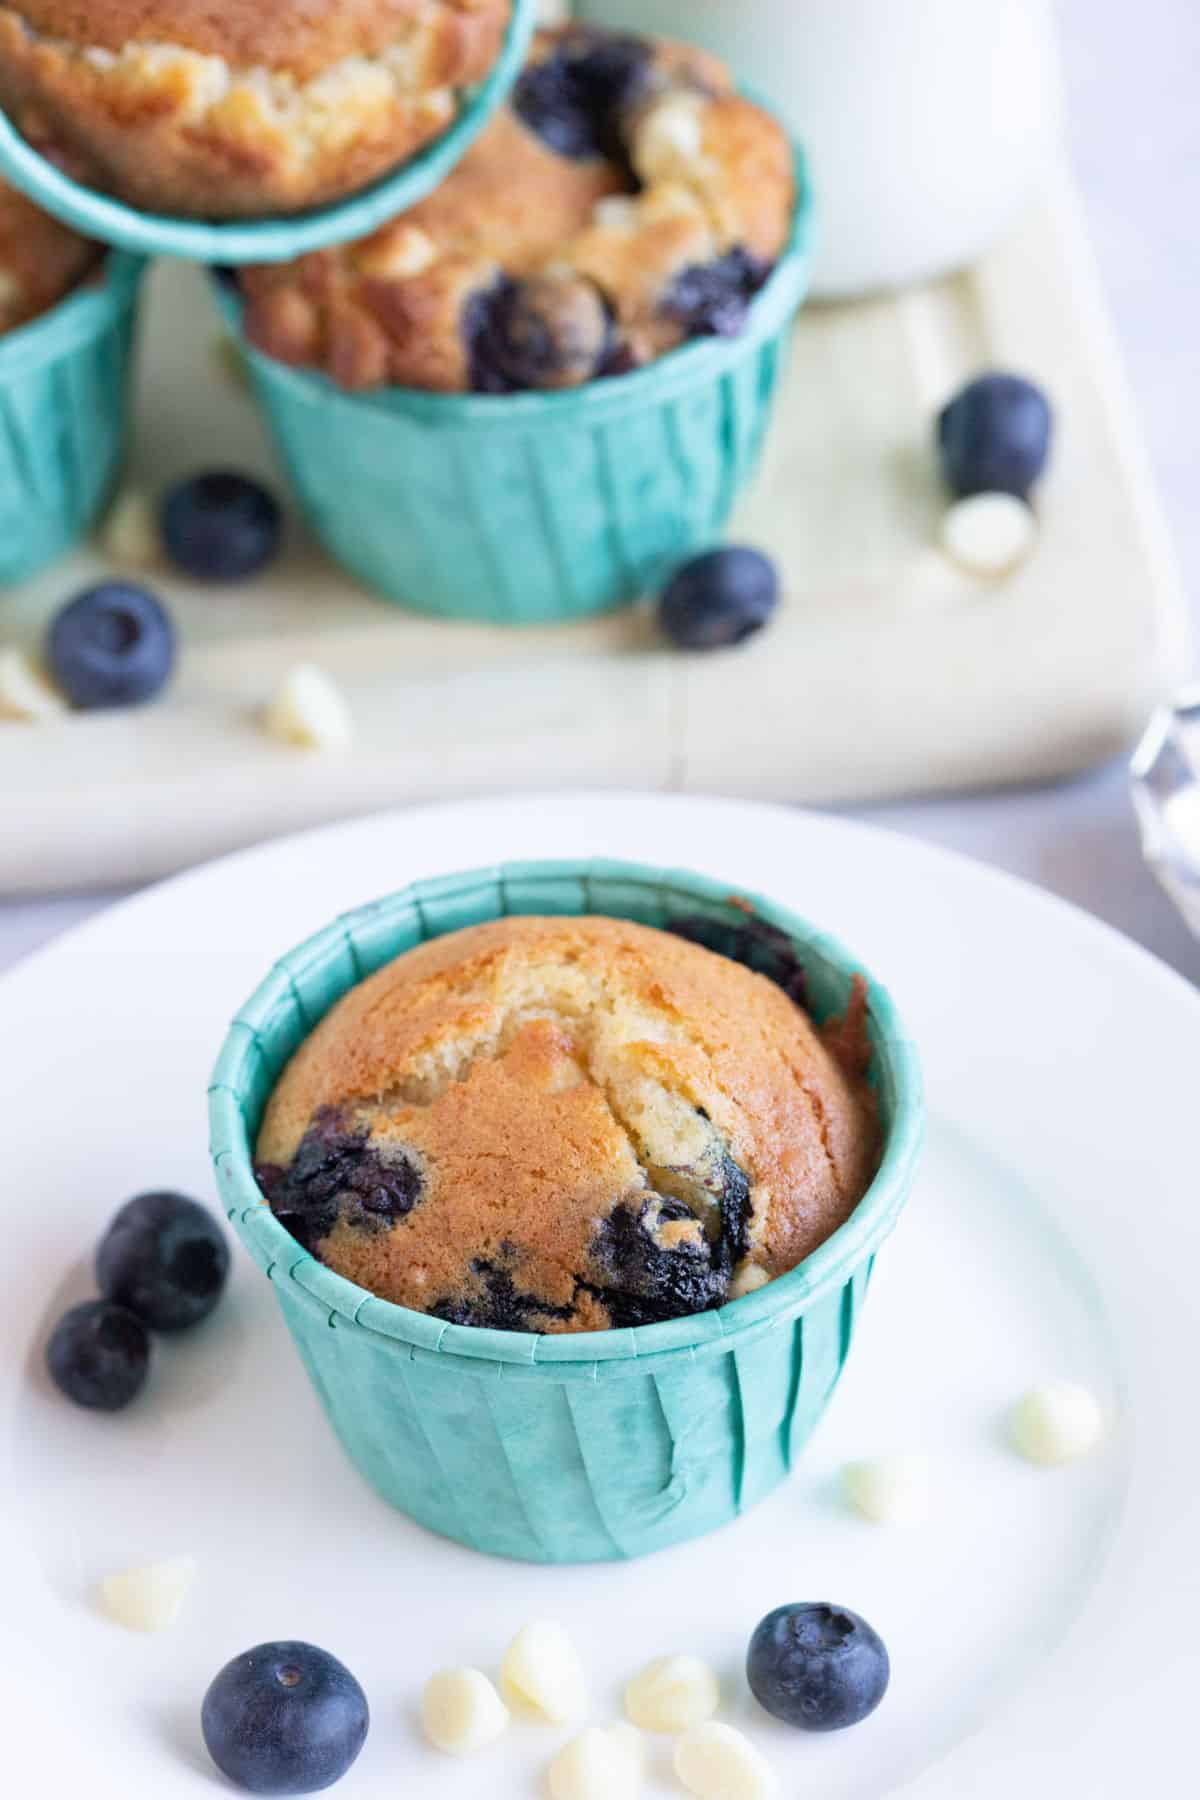 An air fryer muffin on a plate with blueberries and white chocolate chips.